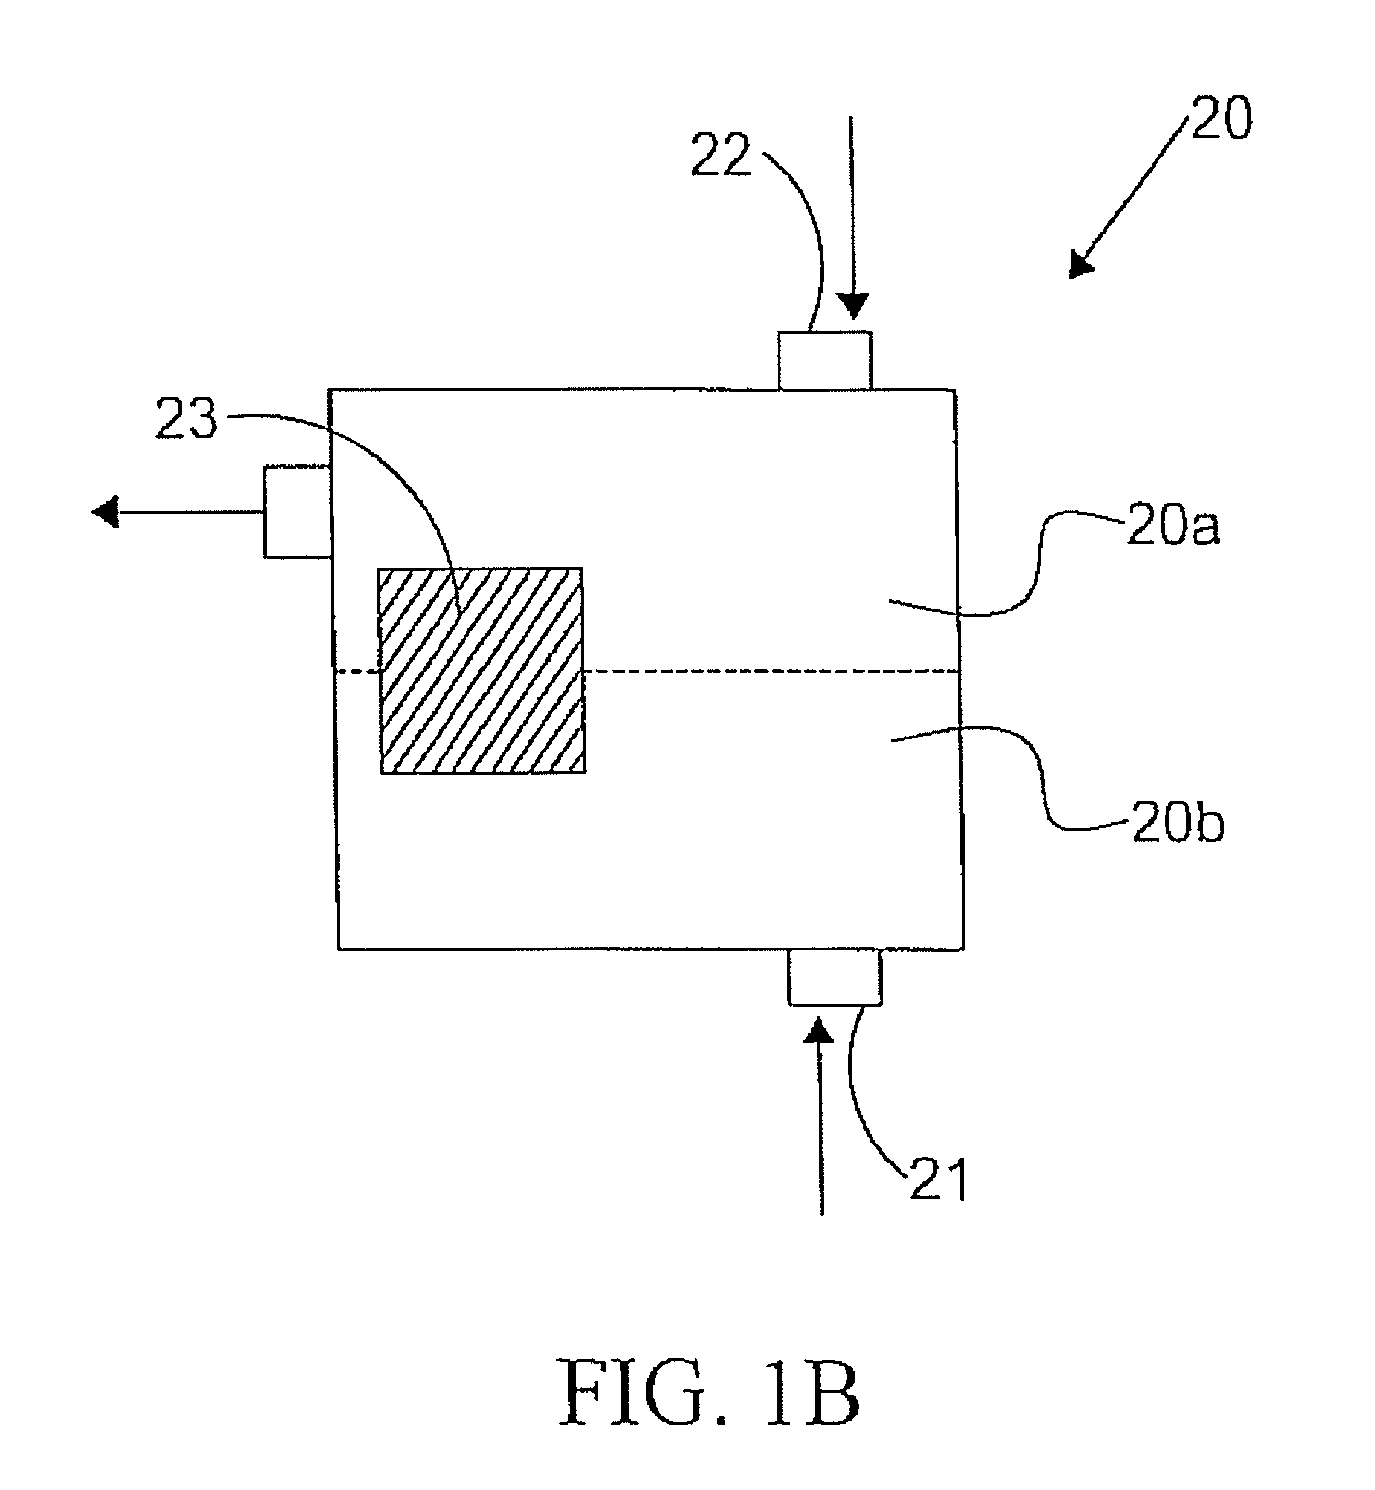 Hybrid hemodialysis access grafts or a hybrid femoral artery bypass graft and systems and methods for producing or modifying the same